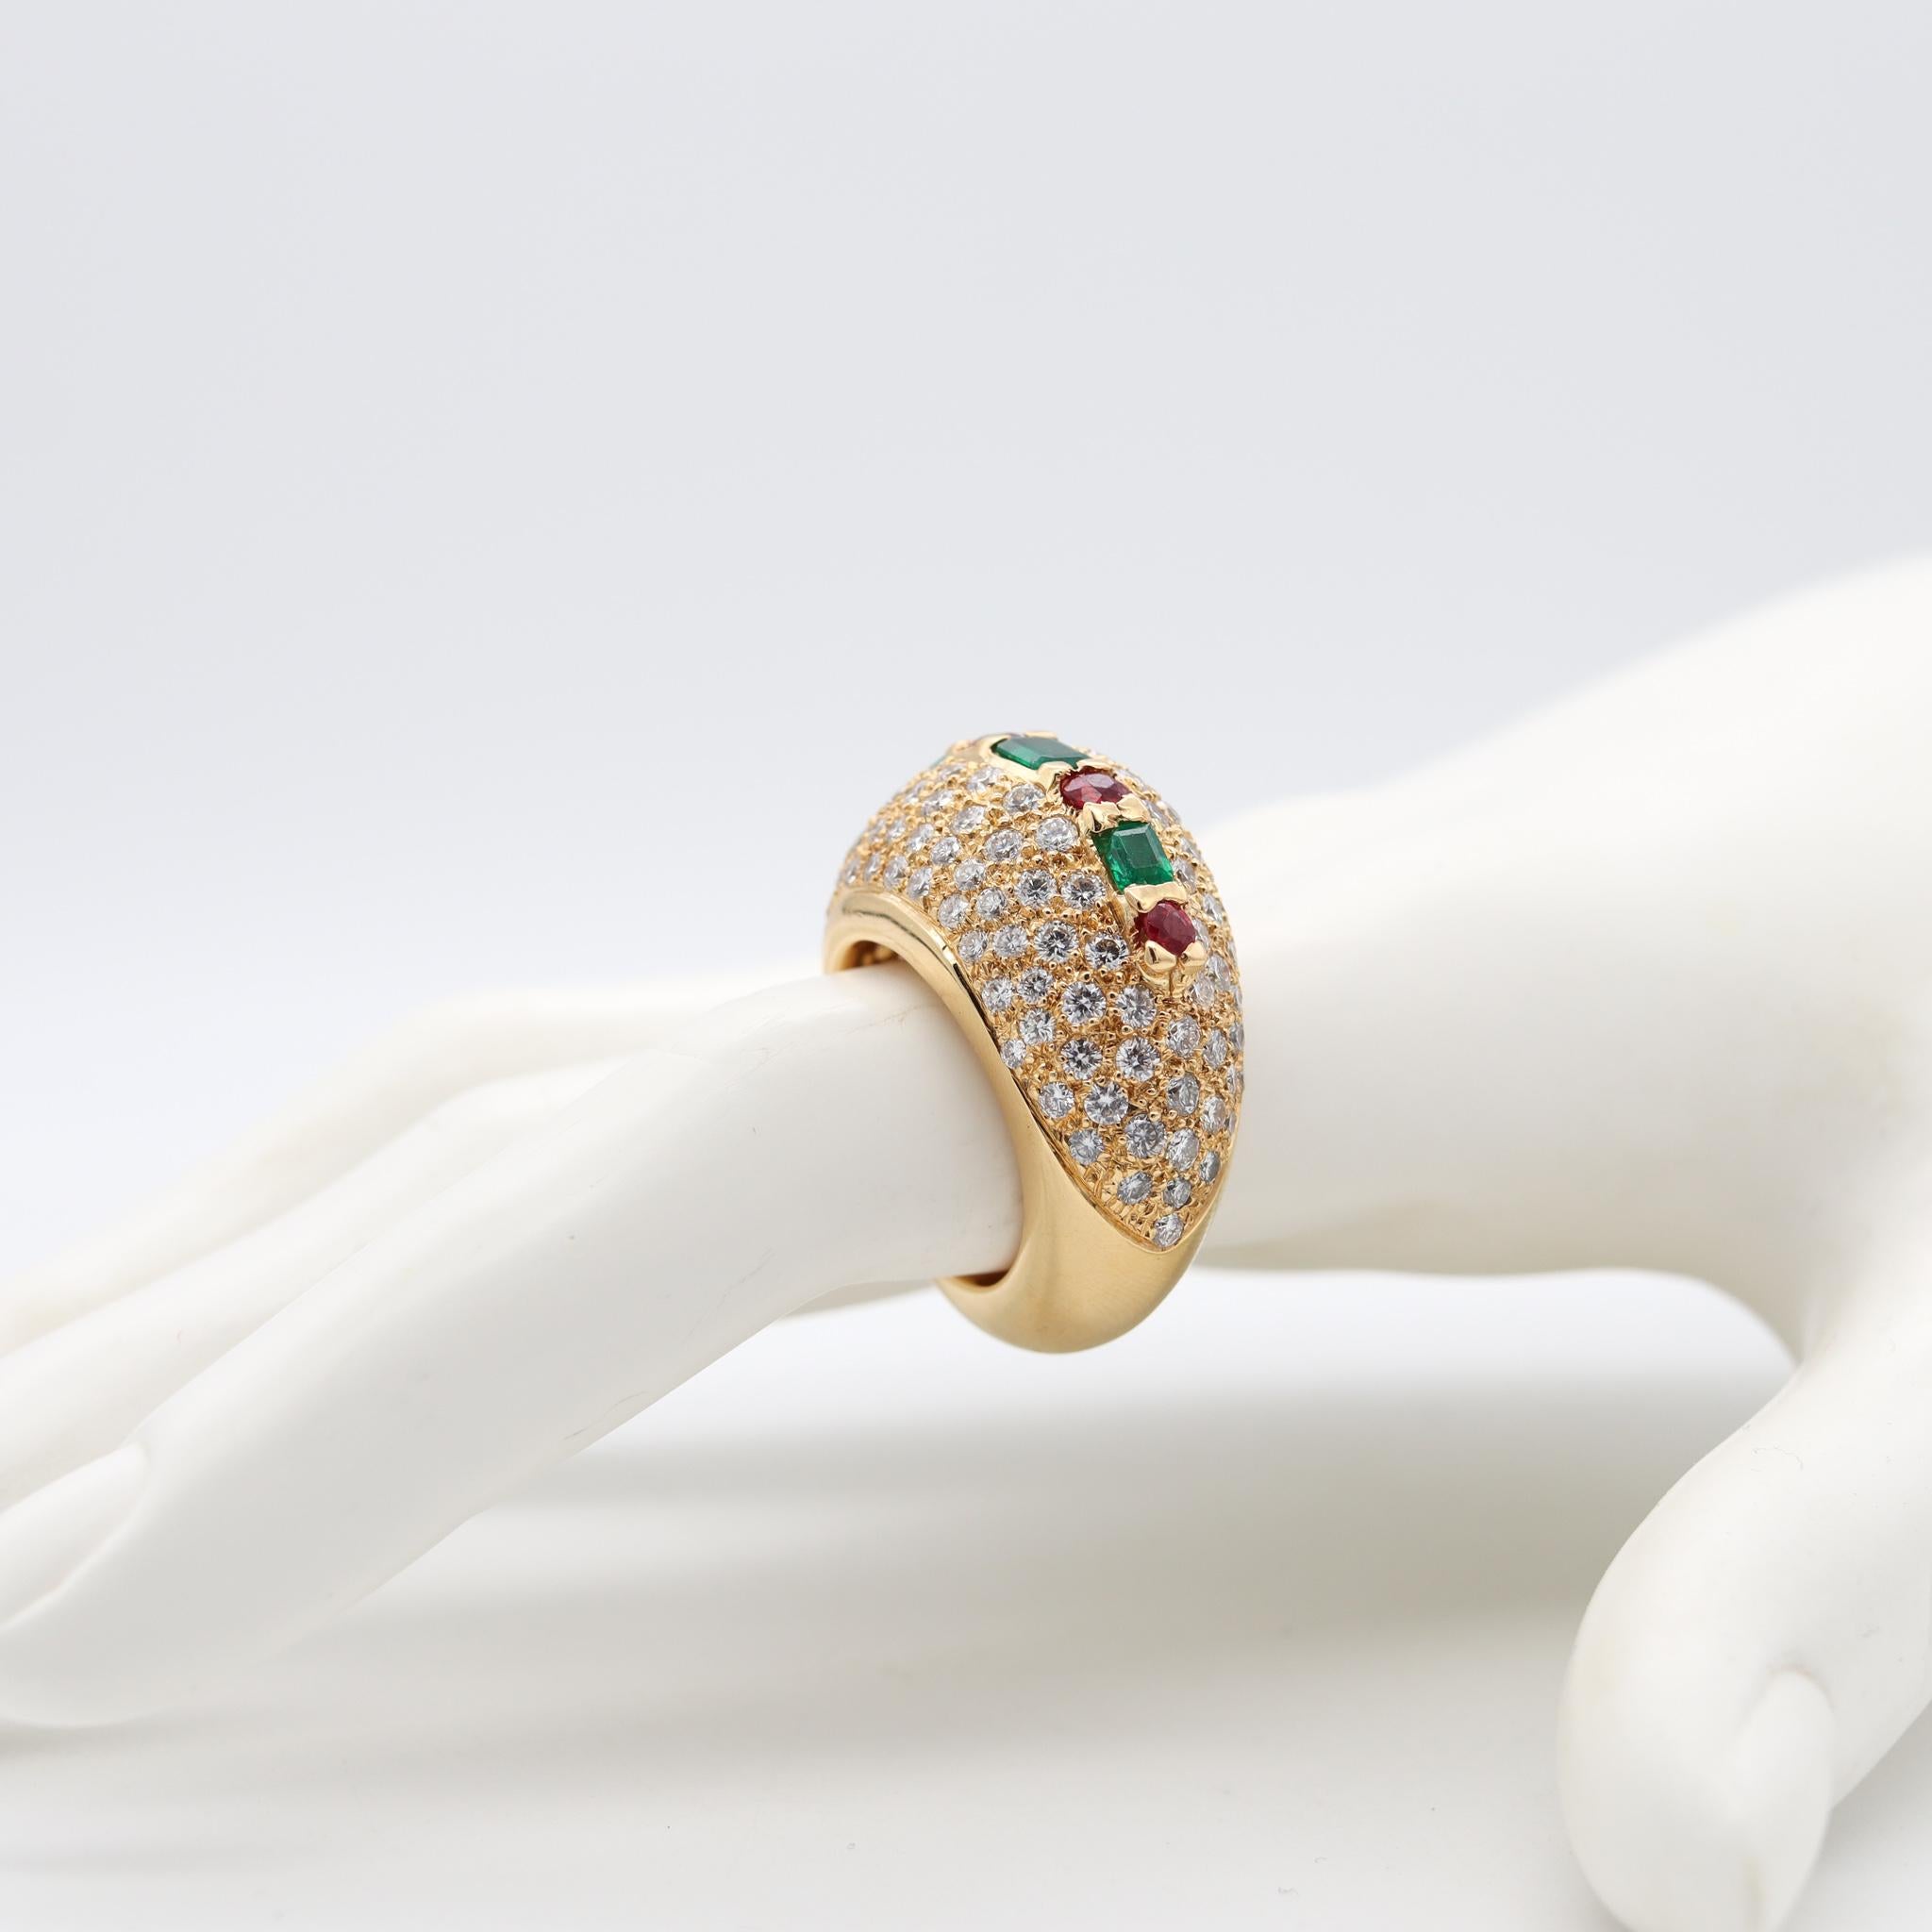 Mixed Cut French Modern Cocktail Ring in 18Kt Gold with 7.32 Cts Diamonds Emerald Rubies